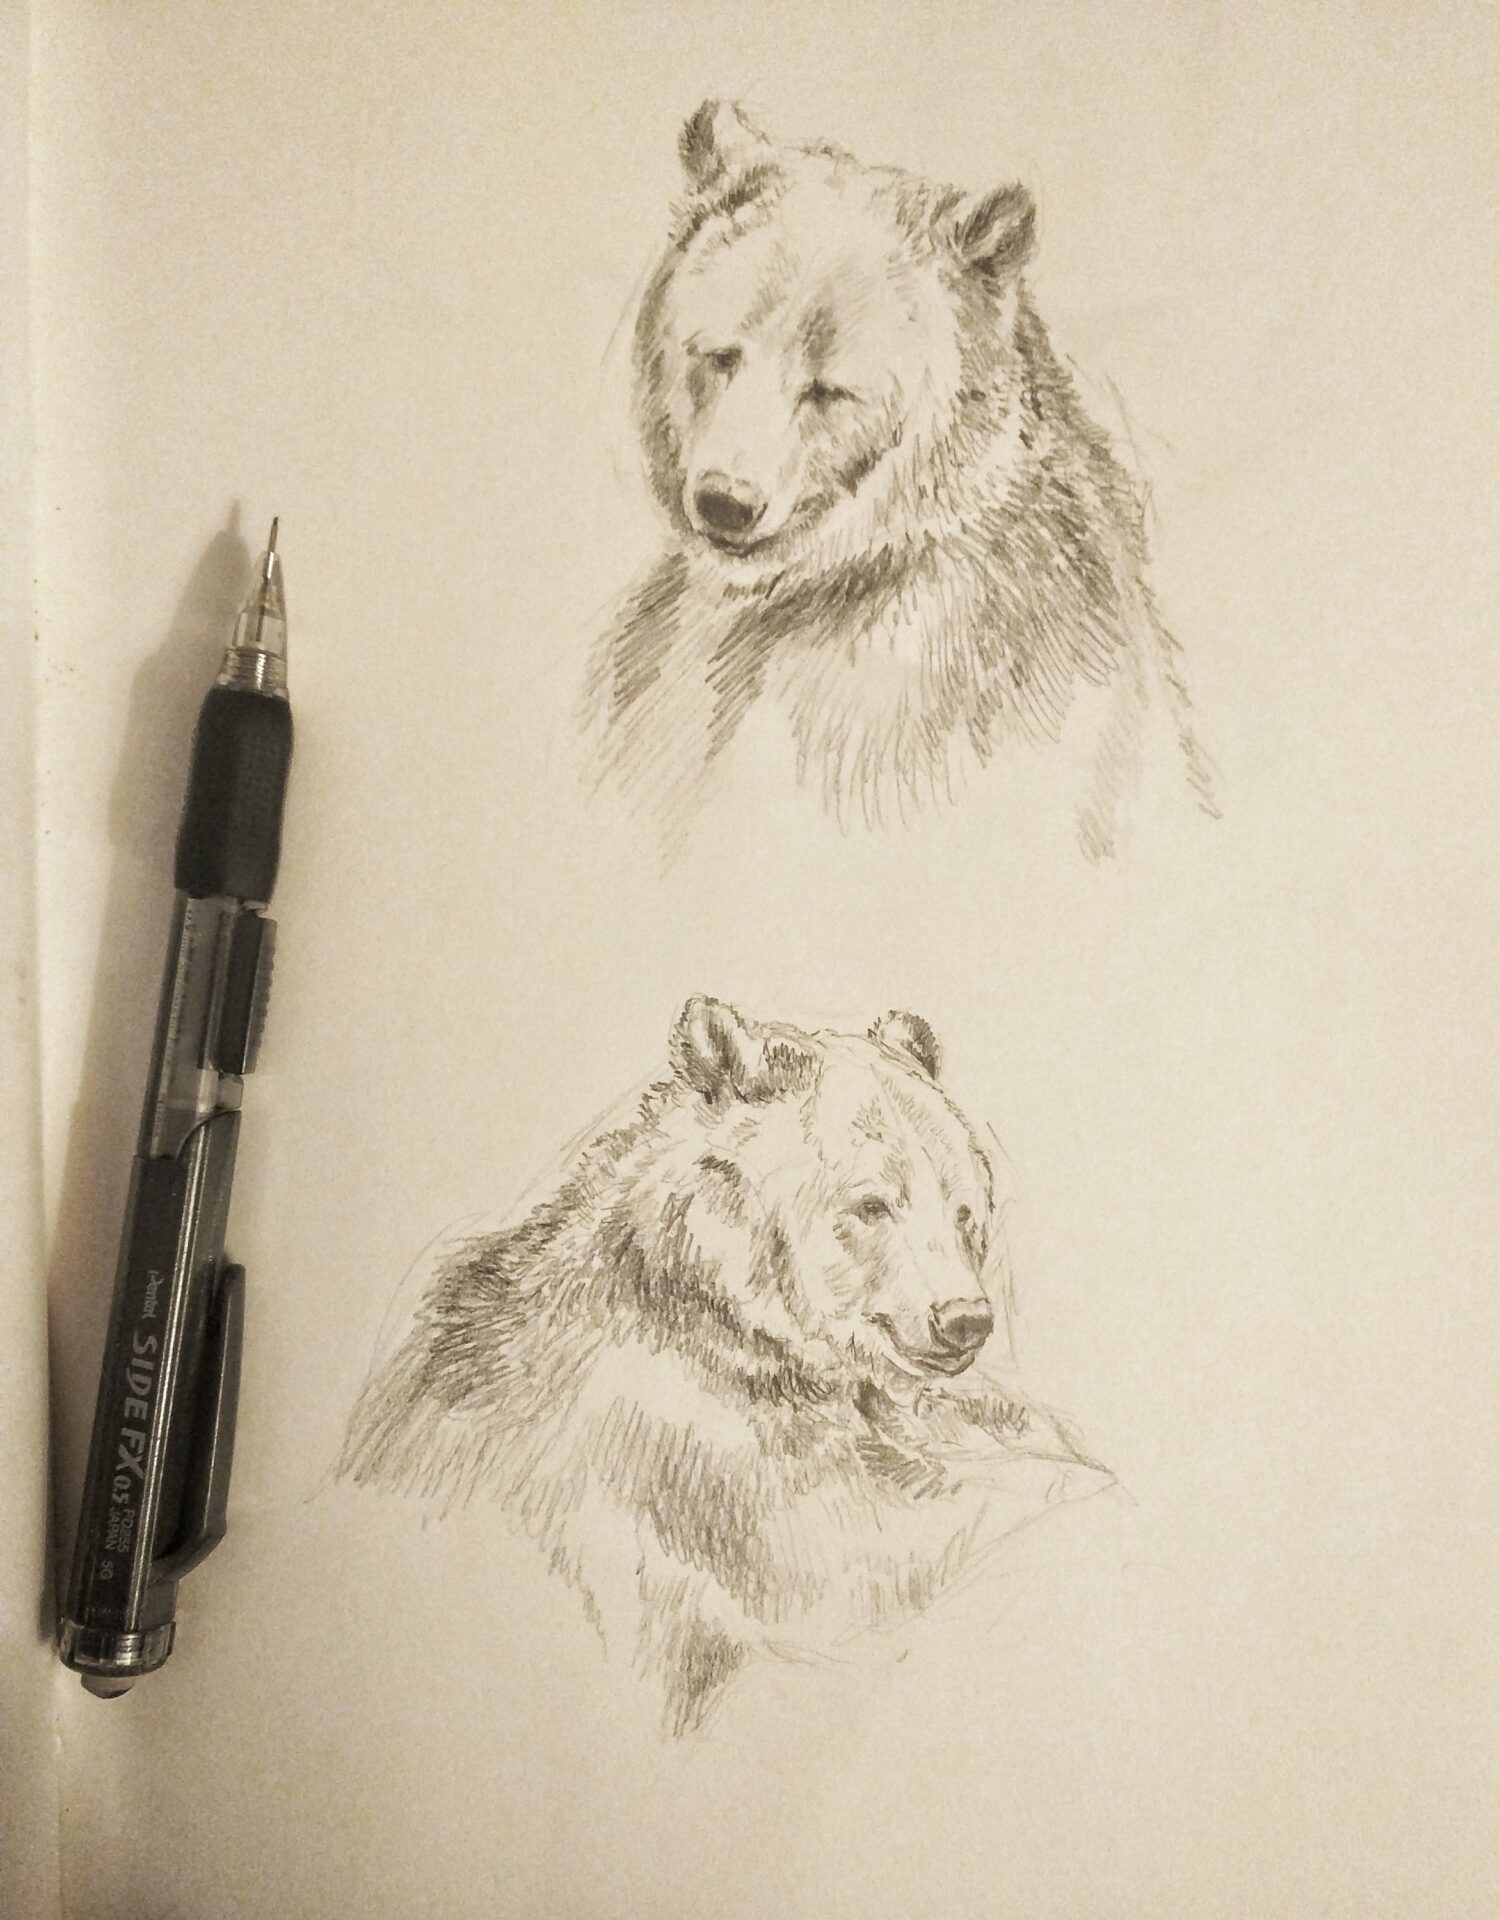 How to Draw a Grizzly Bear (Bears) Step by Step | DrawingTutorials101.com